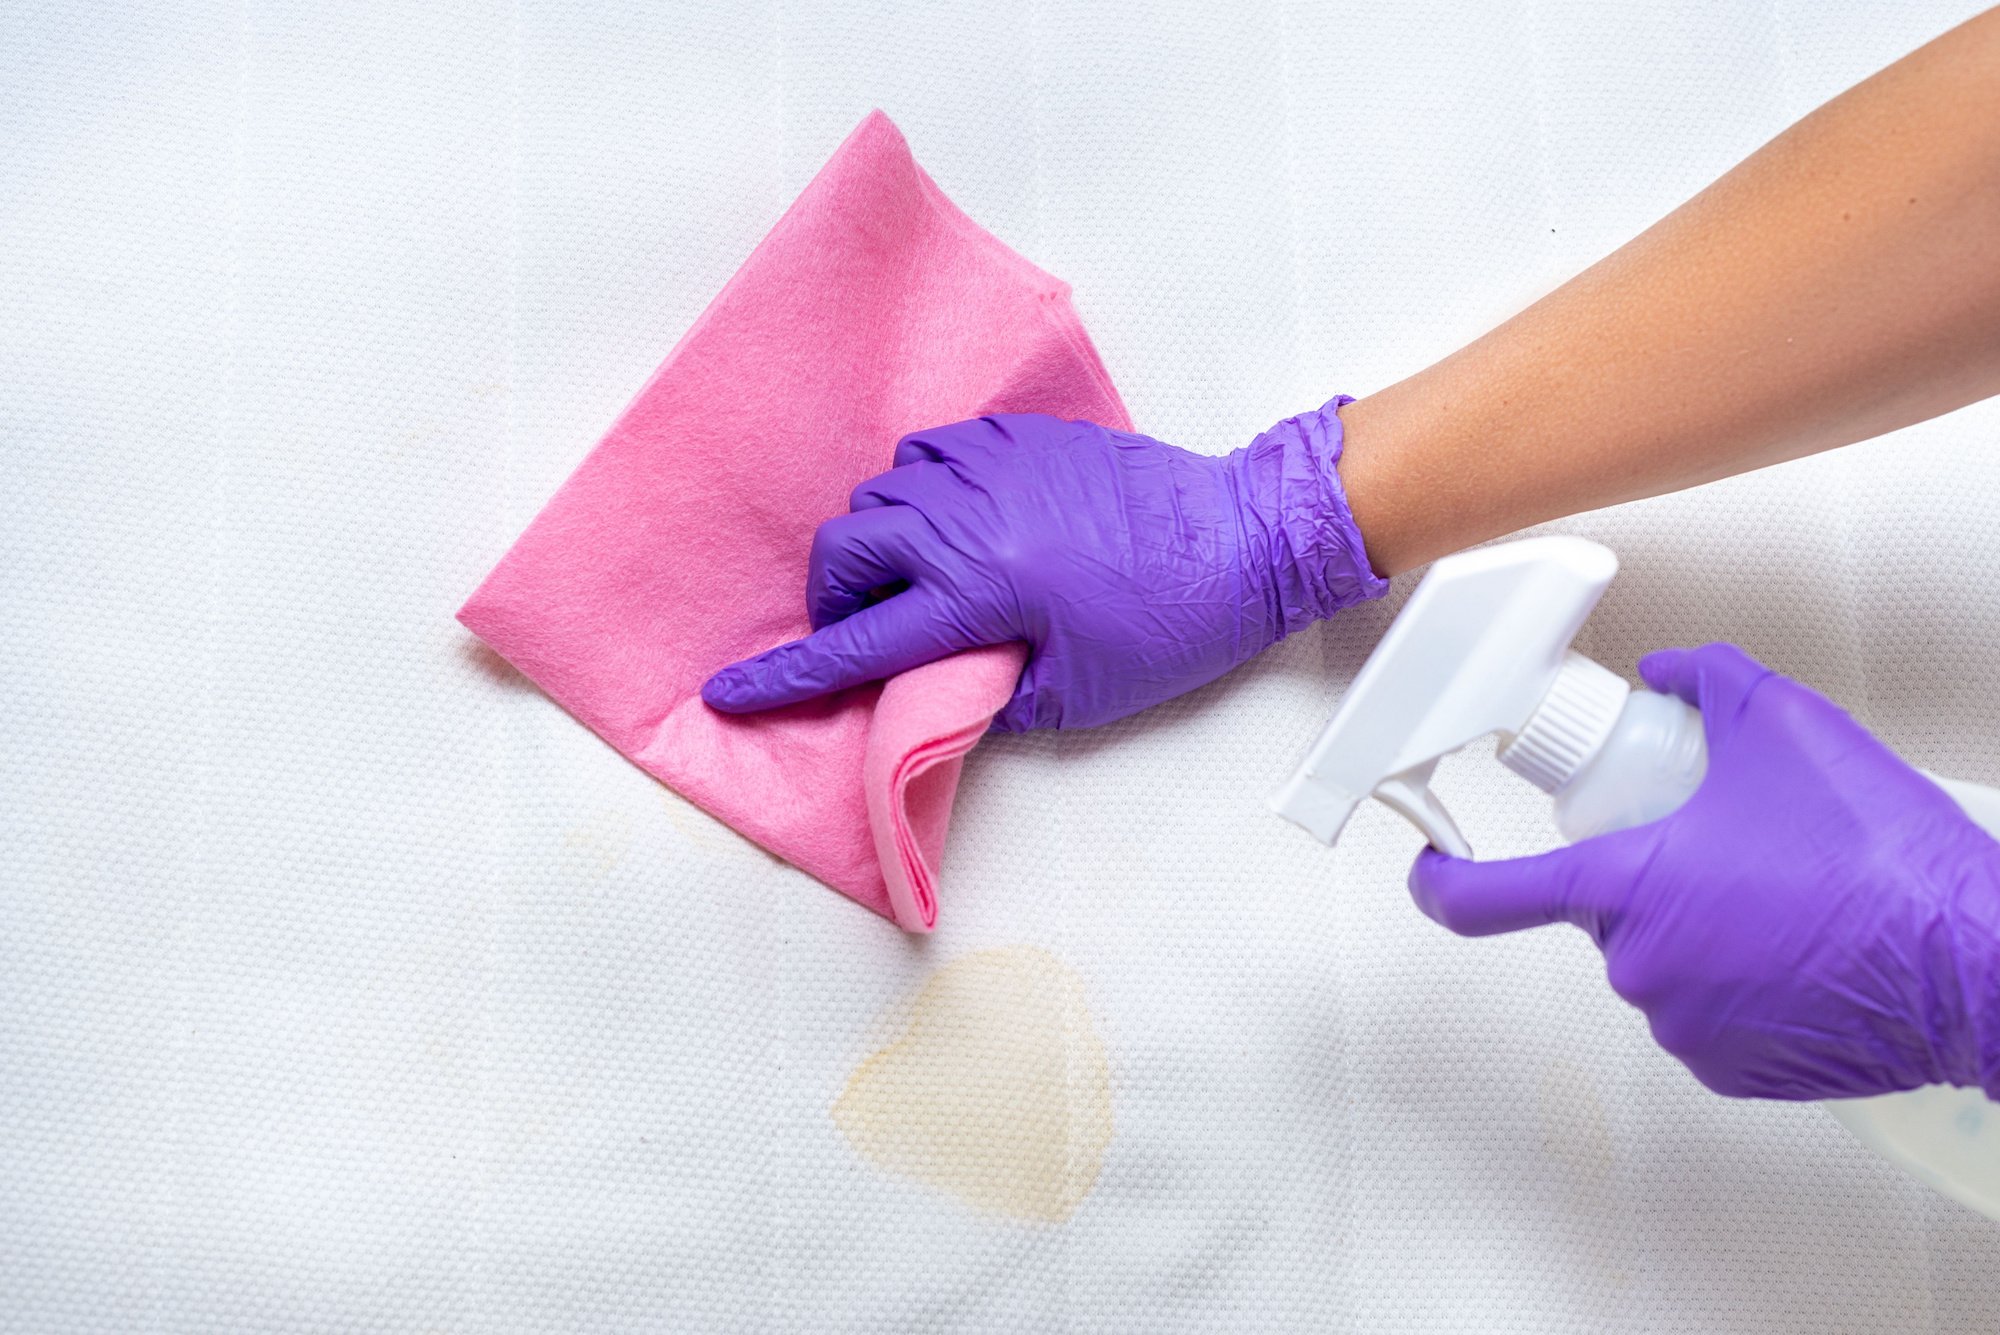 How Do You Remove Mattress Stains?